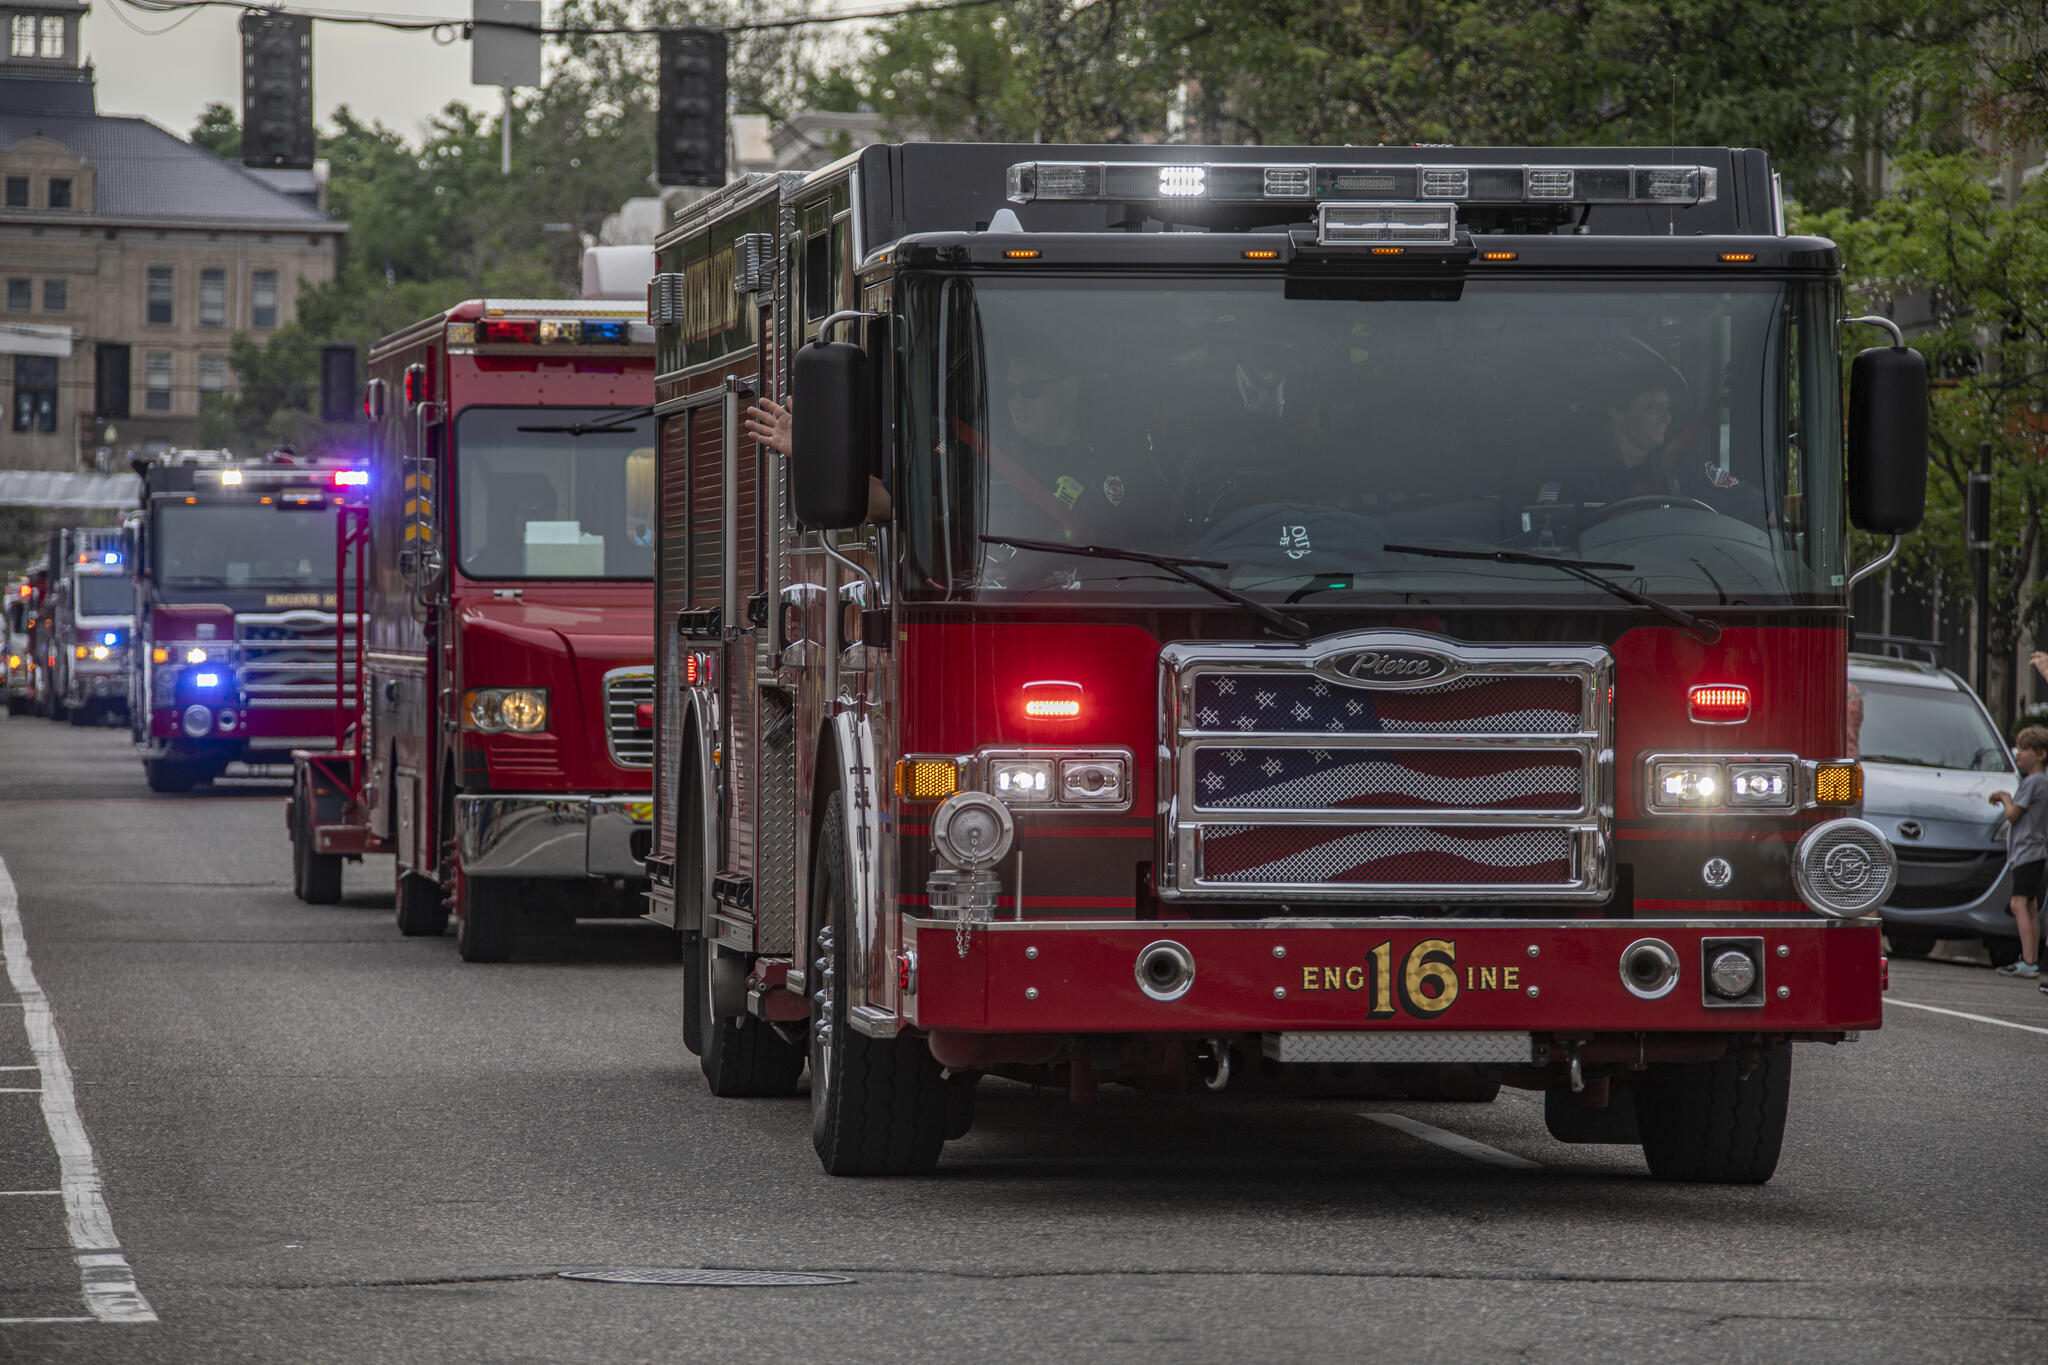 36th Annual Fire Truck Parade & Muster in Littleton This Sat. June 18 (South Metro Fire Rescue